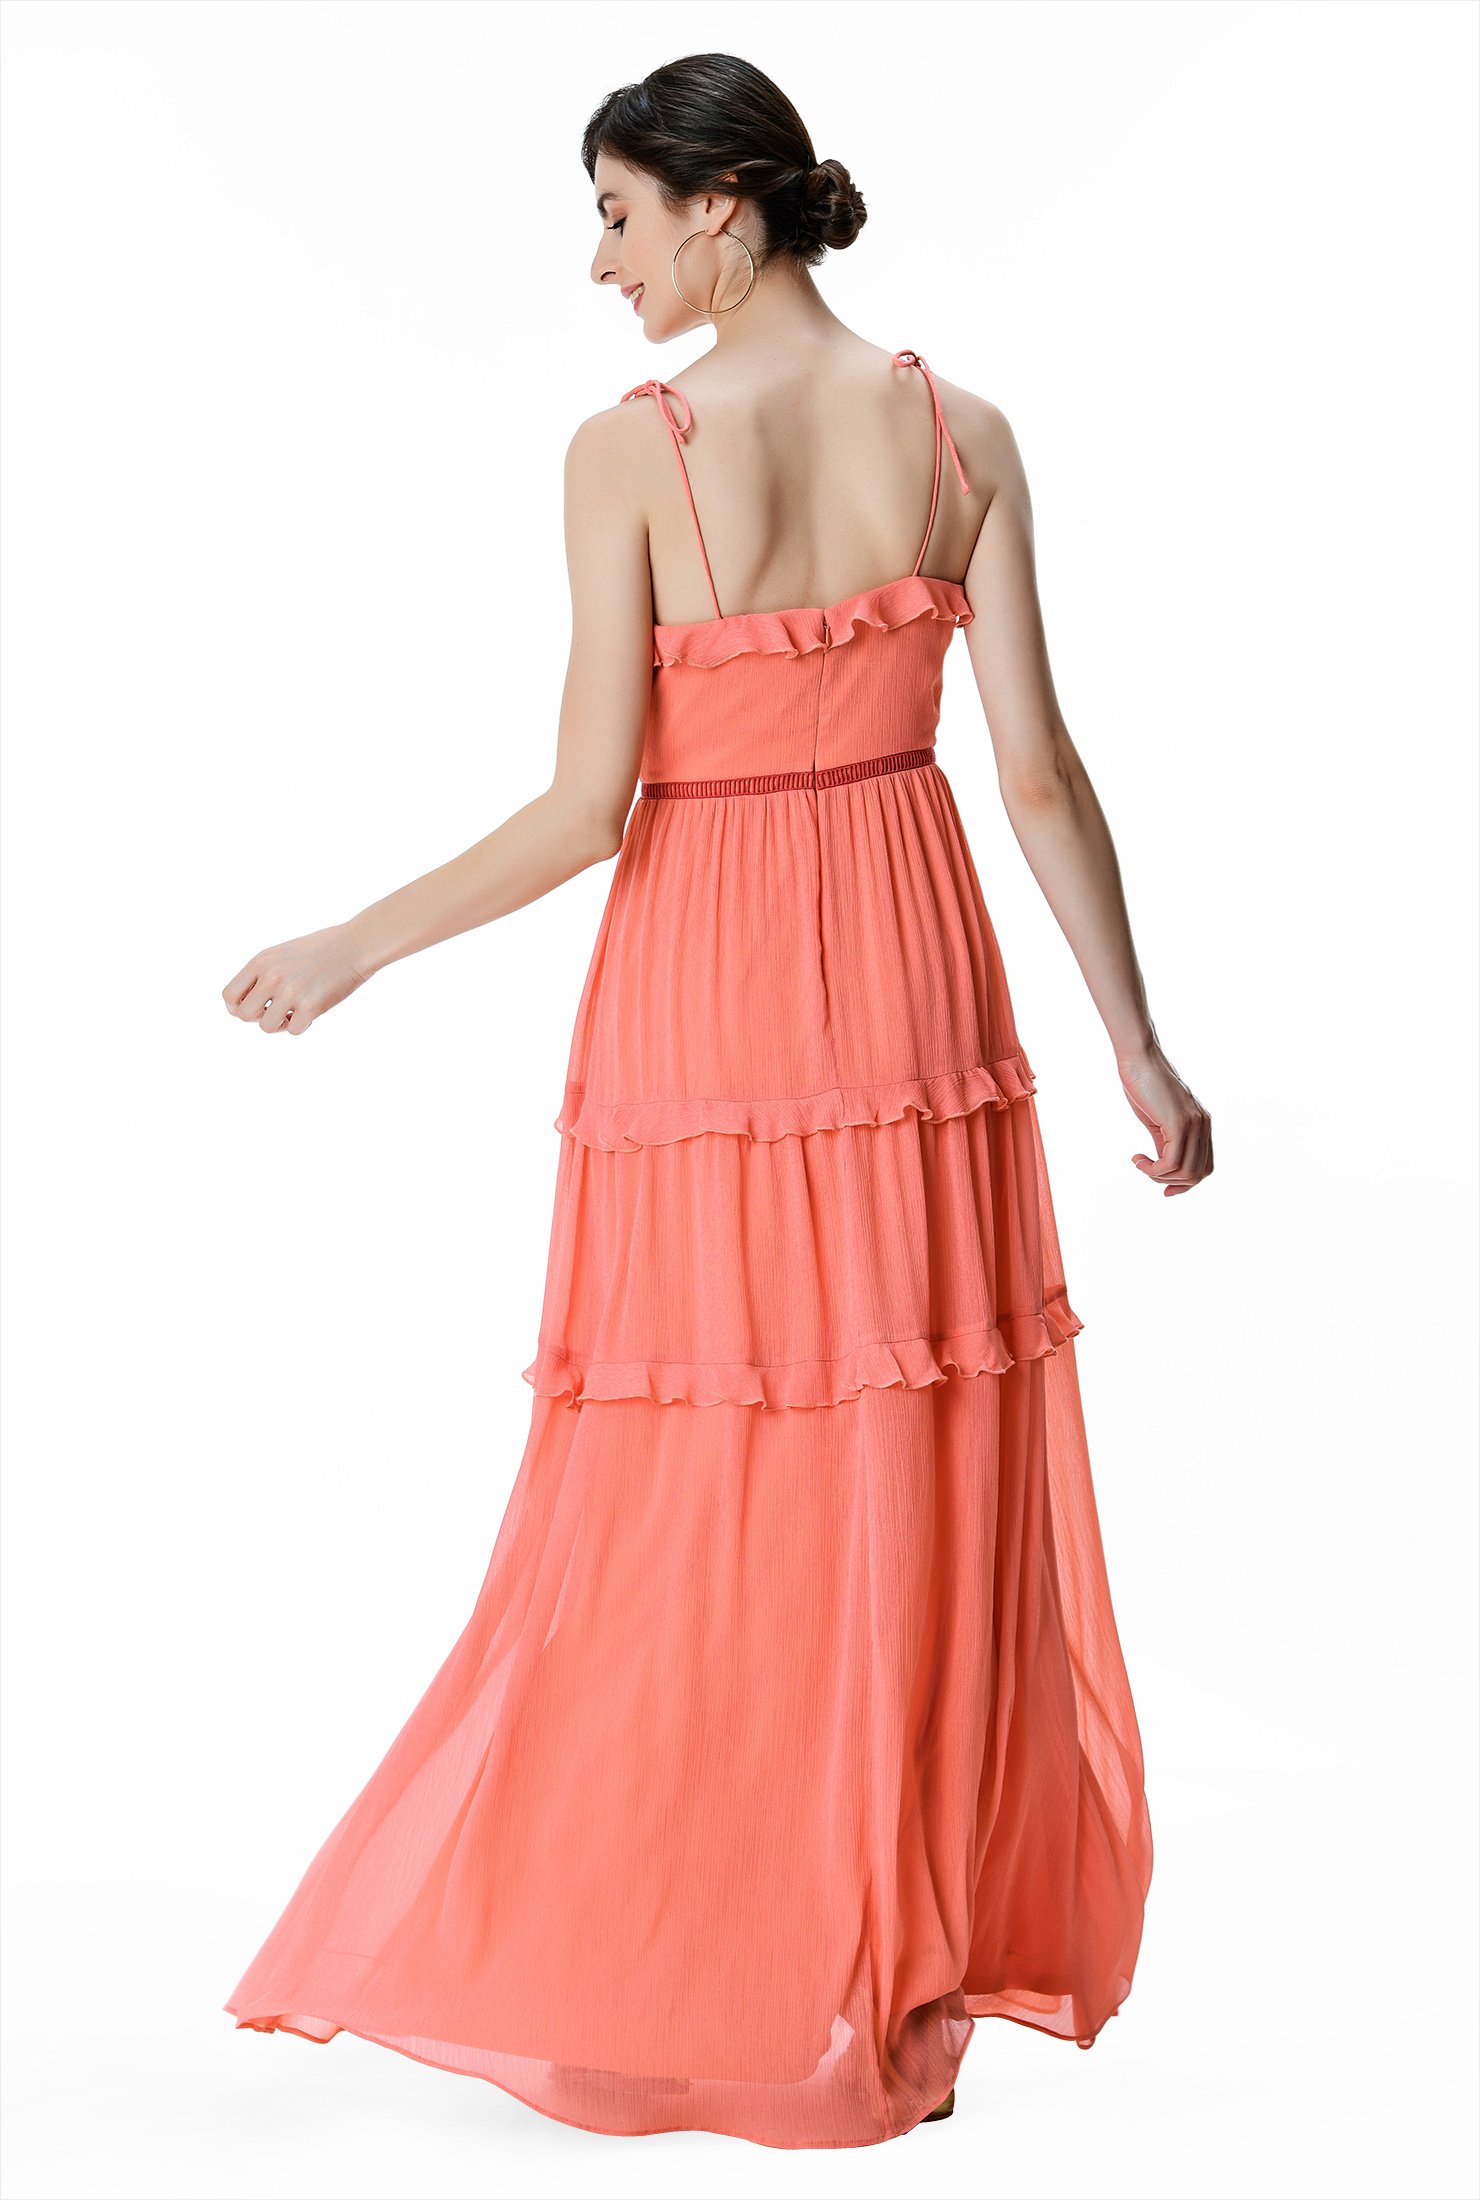 A delight for the eye, our romantic chiffon maxi dress is trimmed with frilly ruffles at the neckline and flouncy tiers and cinched in at the seamed waist with lattice trim.